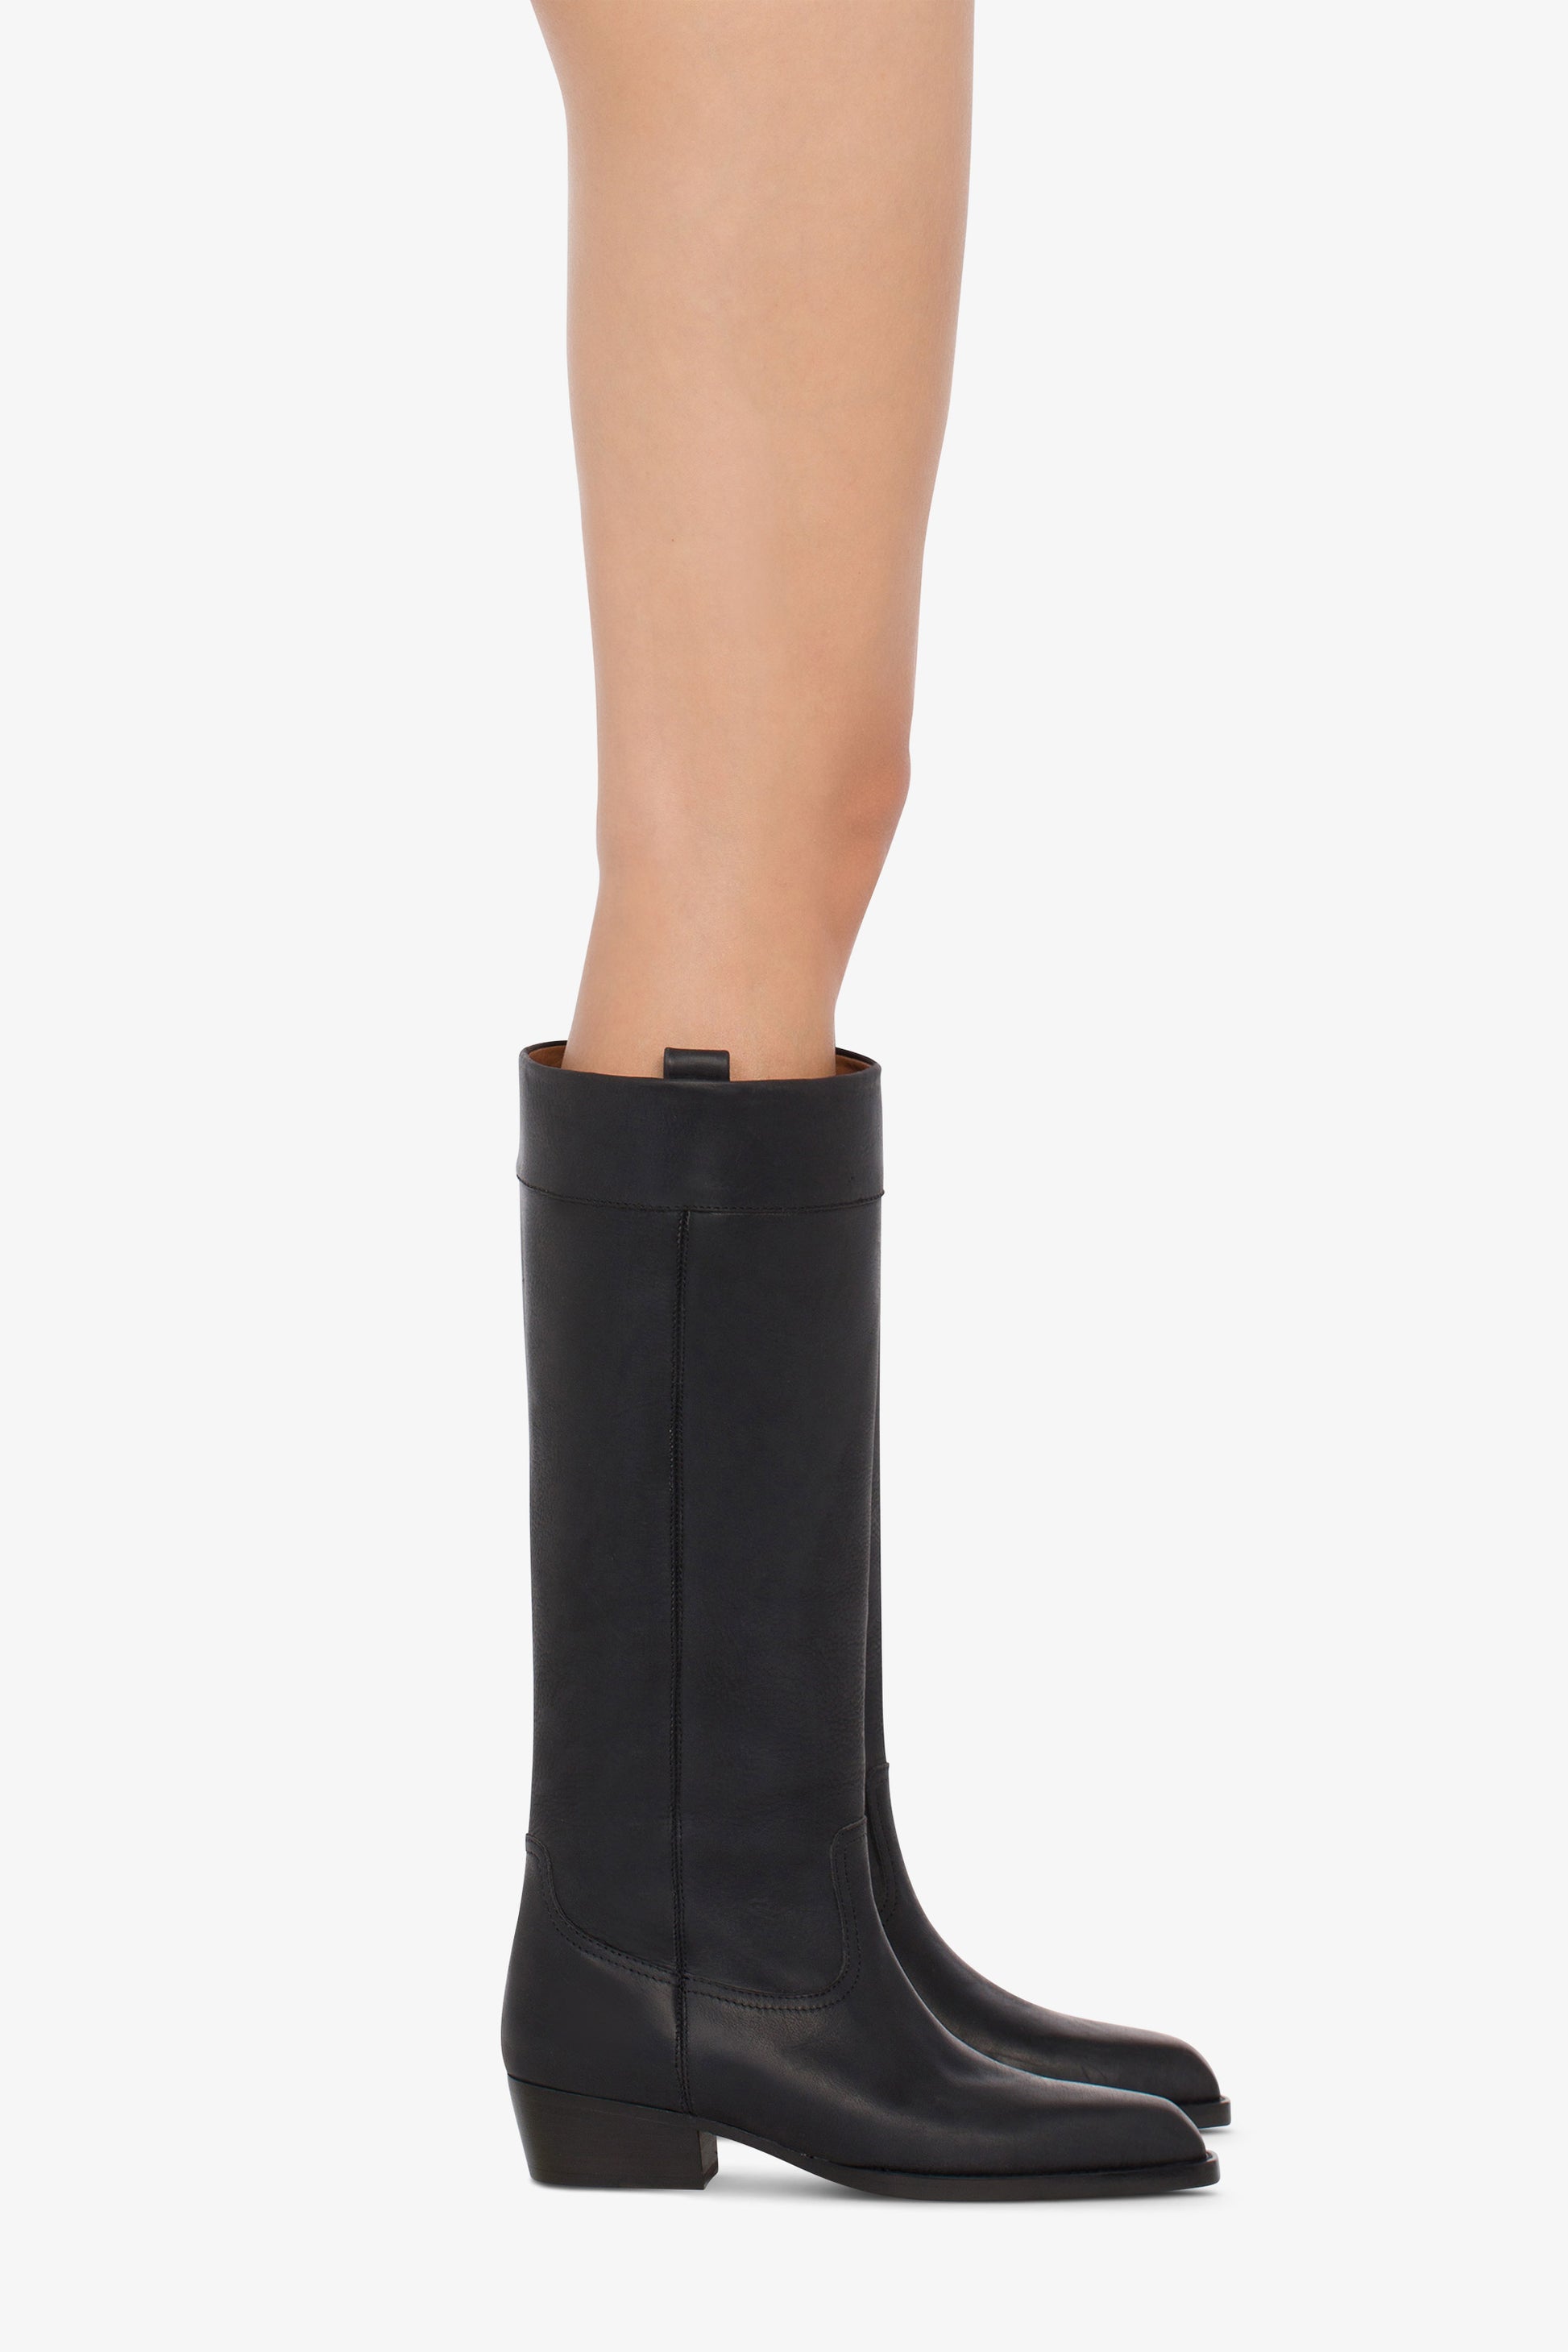 Calf-length boots in soft black pebble leather - Product worn